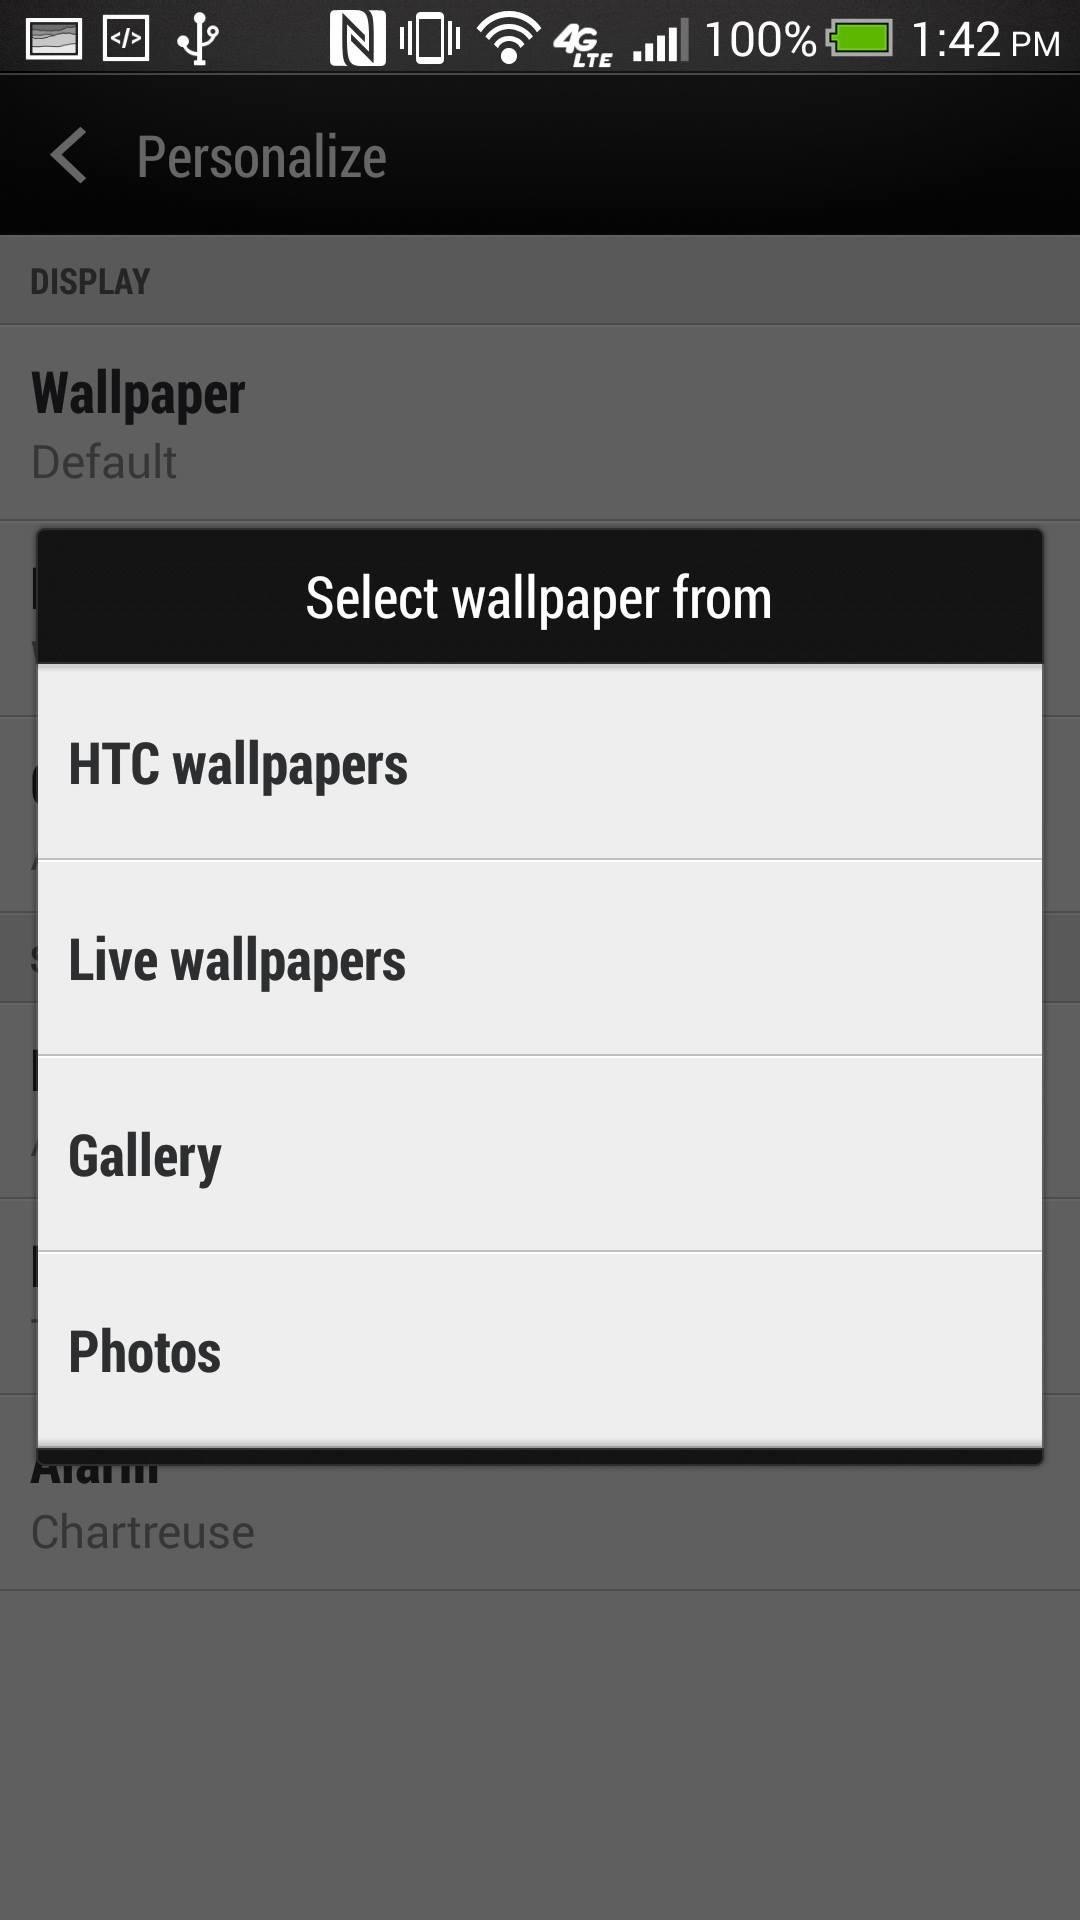 Turn Your HTC One into a Living Art Gallery with New Wallpapers from Famous Painters Every Day